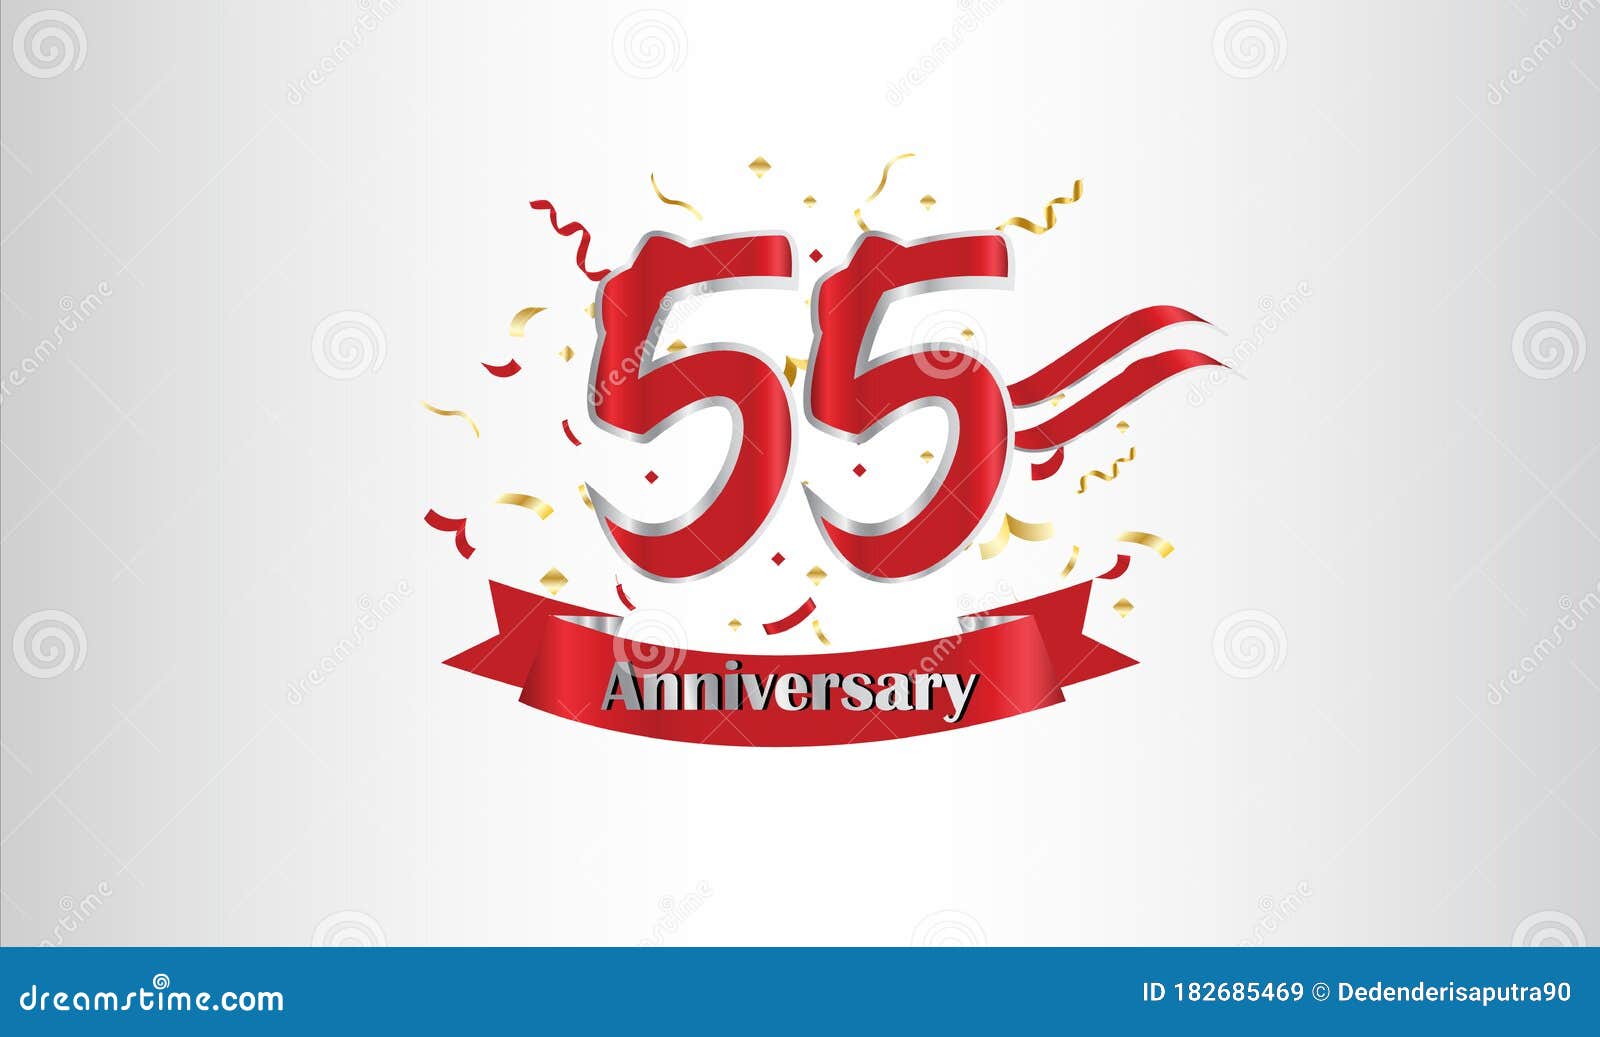 Anniversary Celebration Background. with the 55th Number in Gold and ...